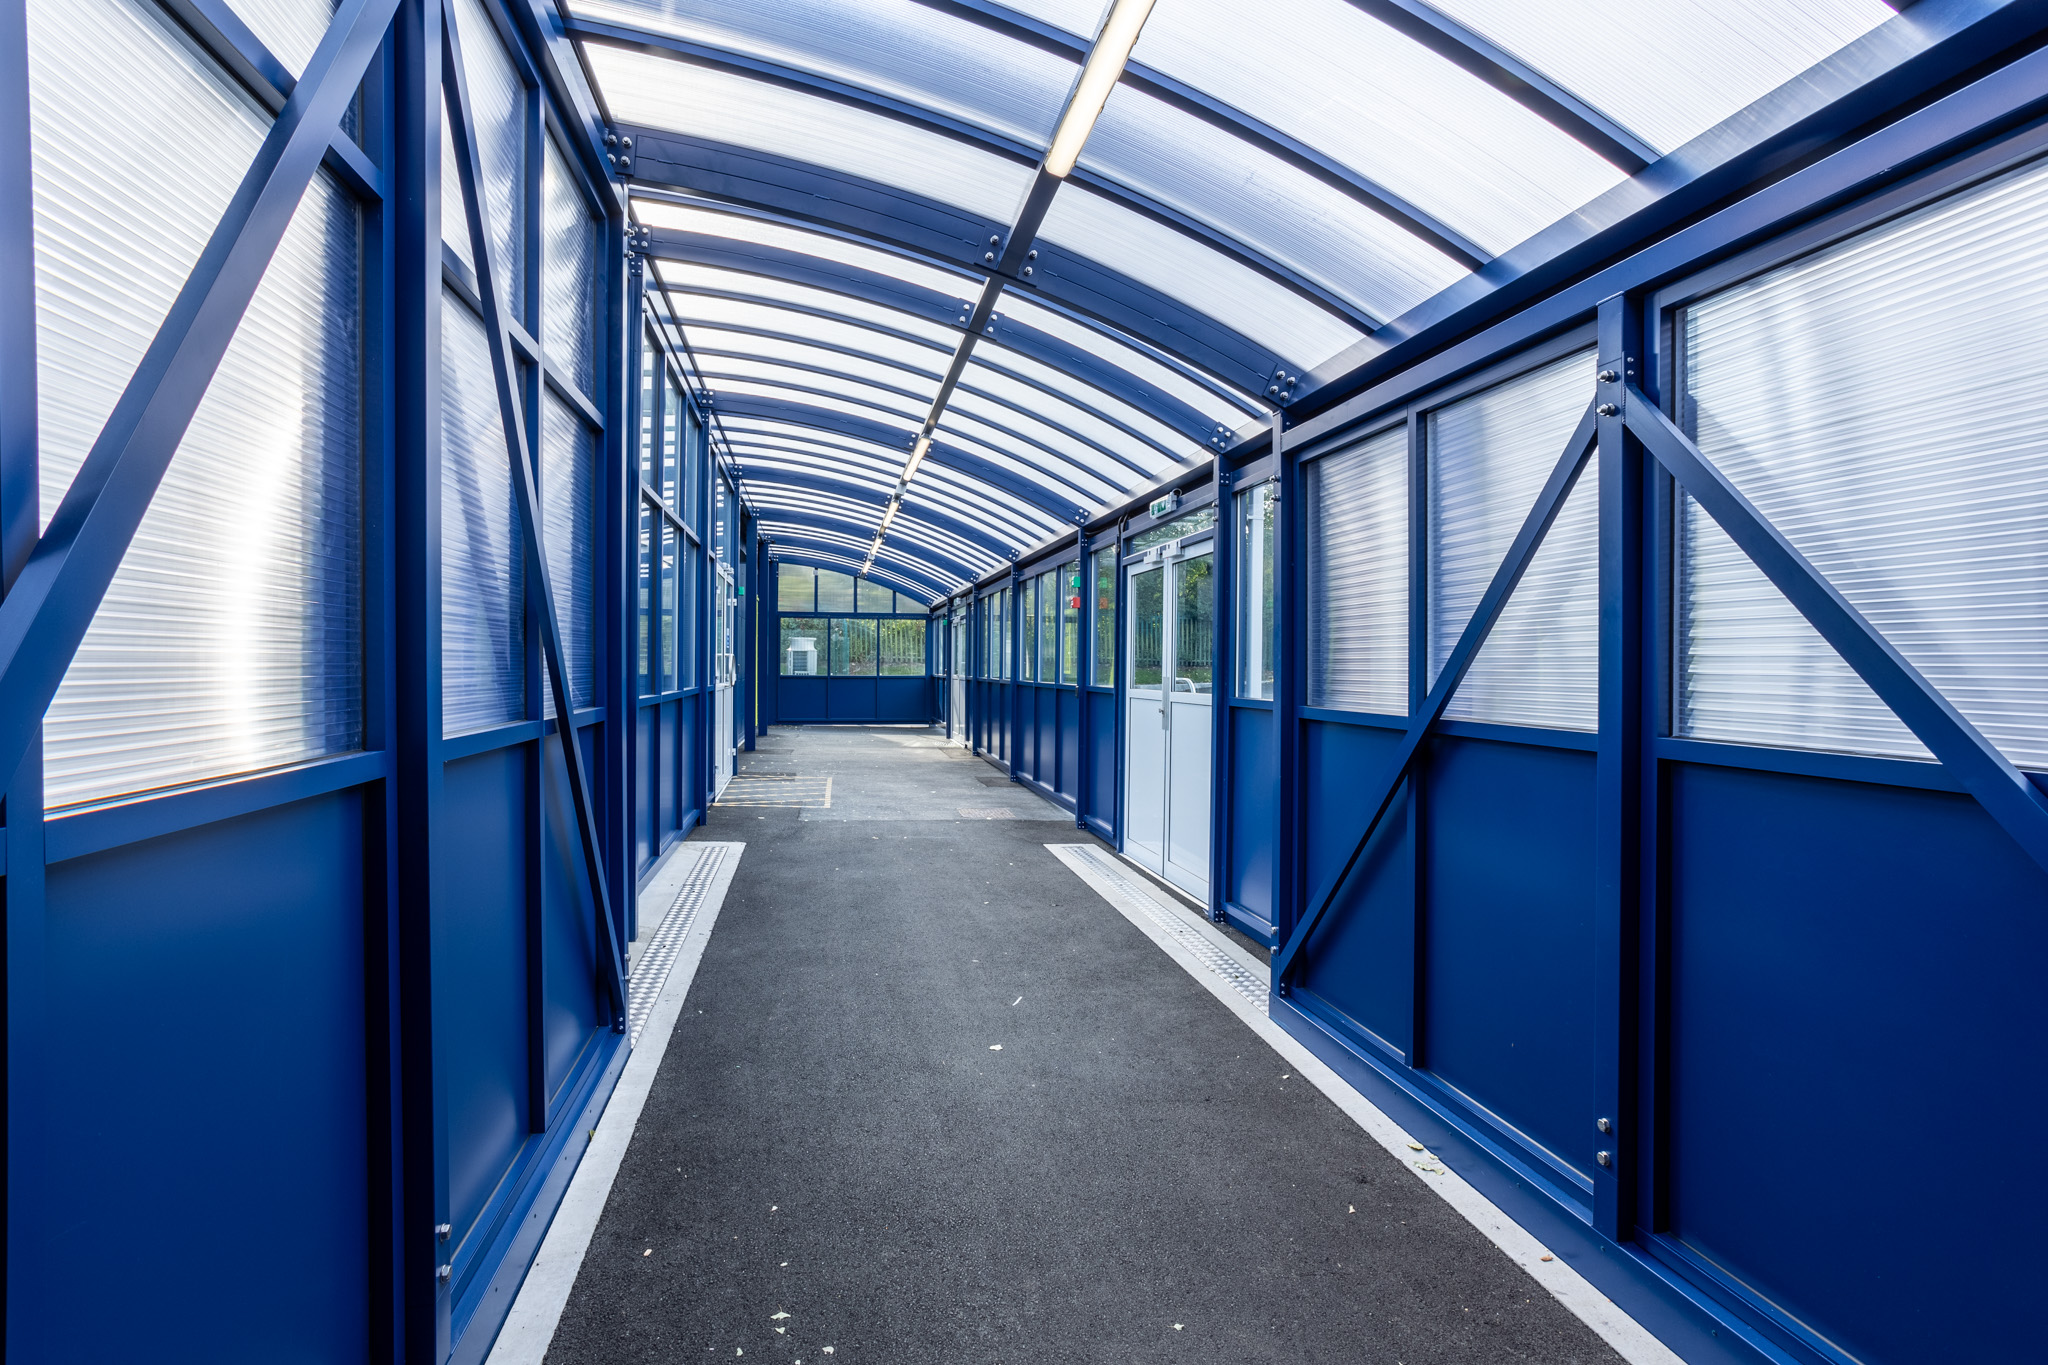 Springwood Primary School, Manchester – Case Study